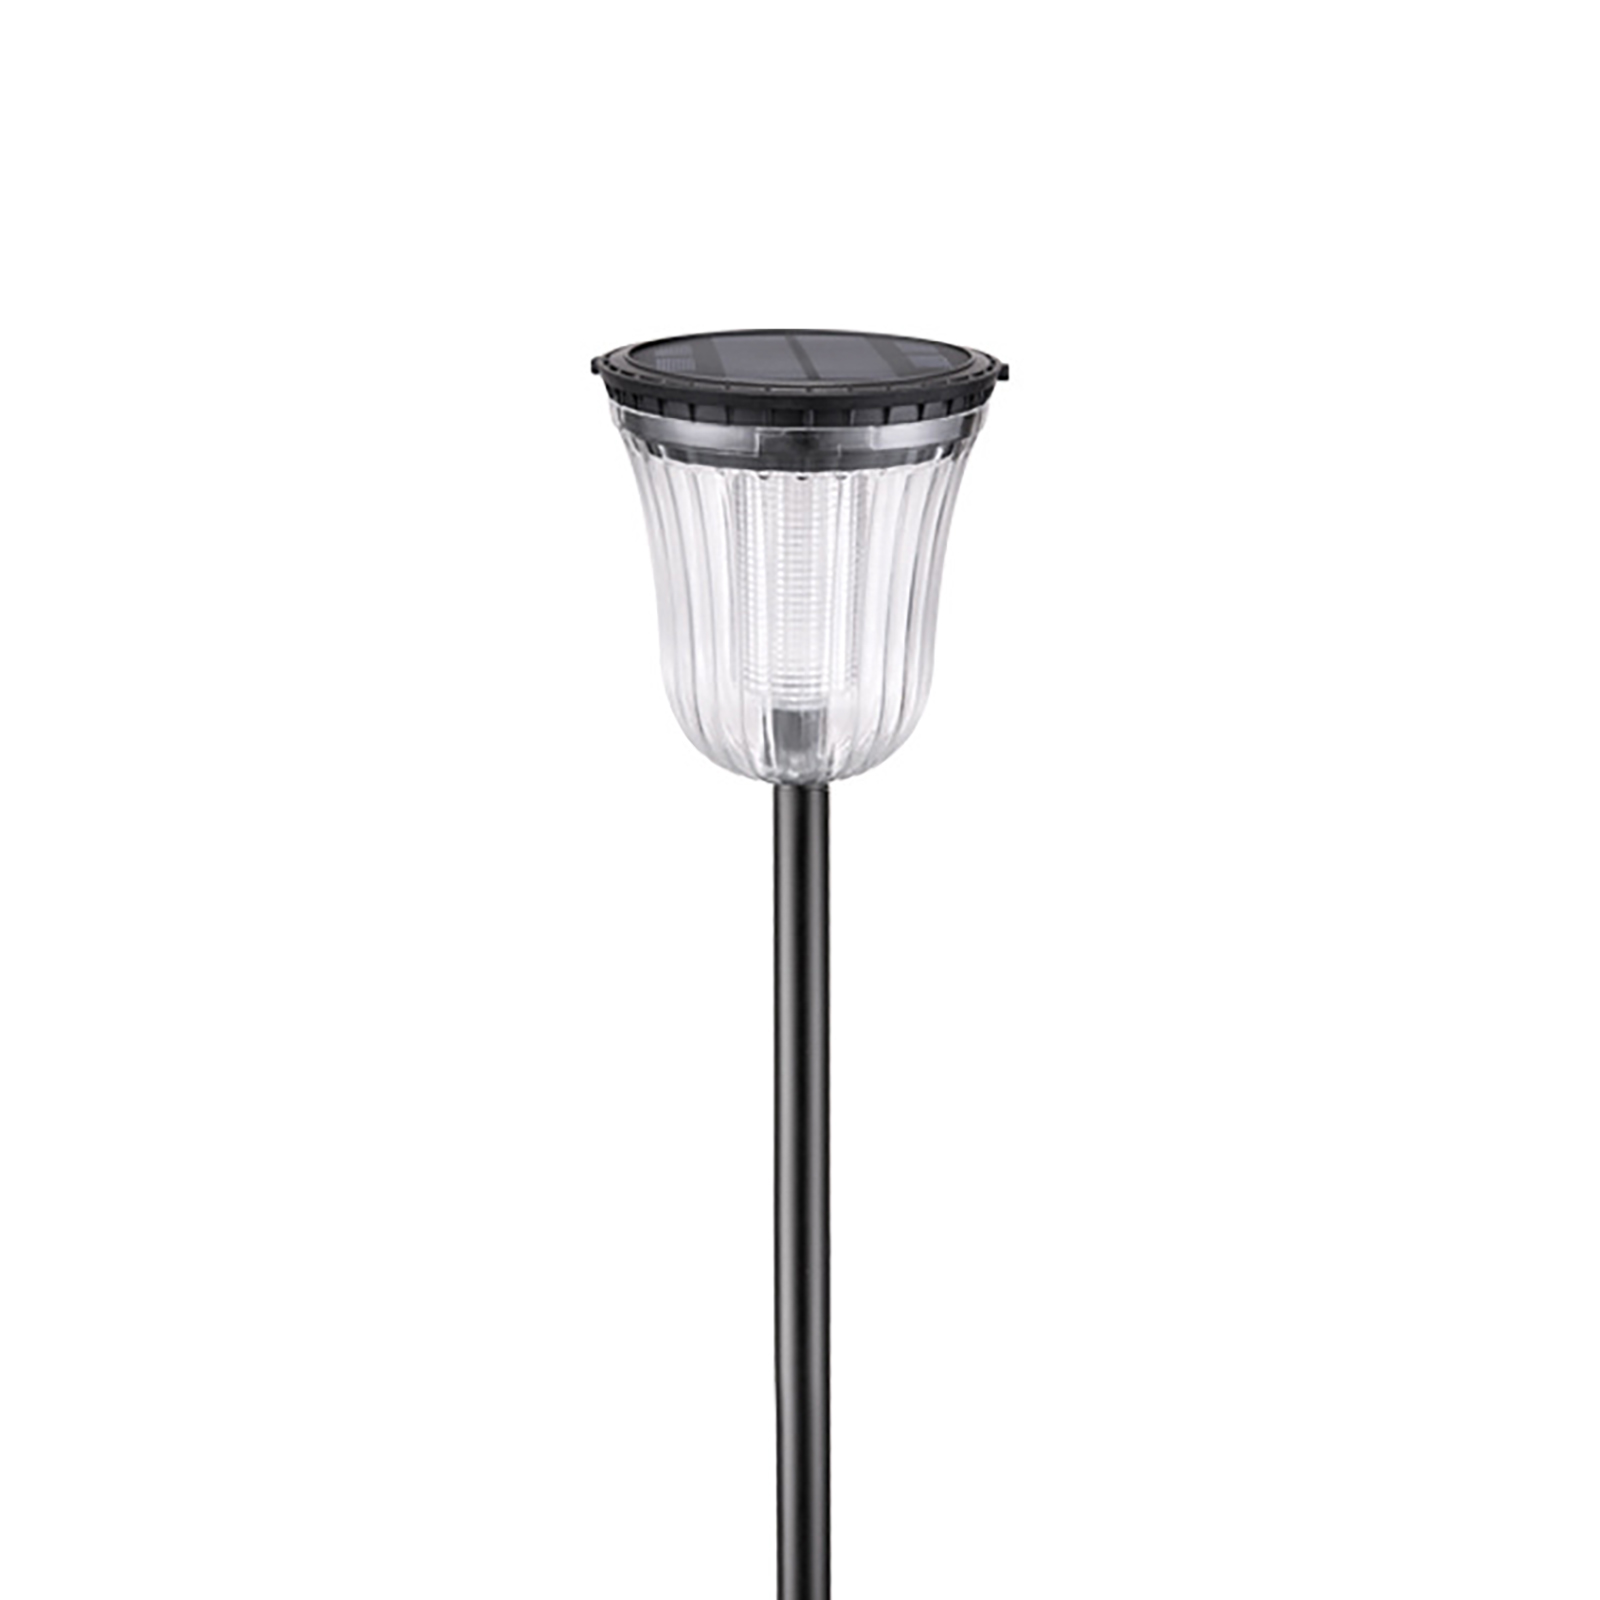 Outdoor LED Solar Light Ip65 Waterproof 2 Lighting Modes 200LM Ultra Bright Stake Lights For Garden Yard Lawn Backyard Porch Decor